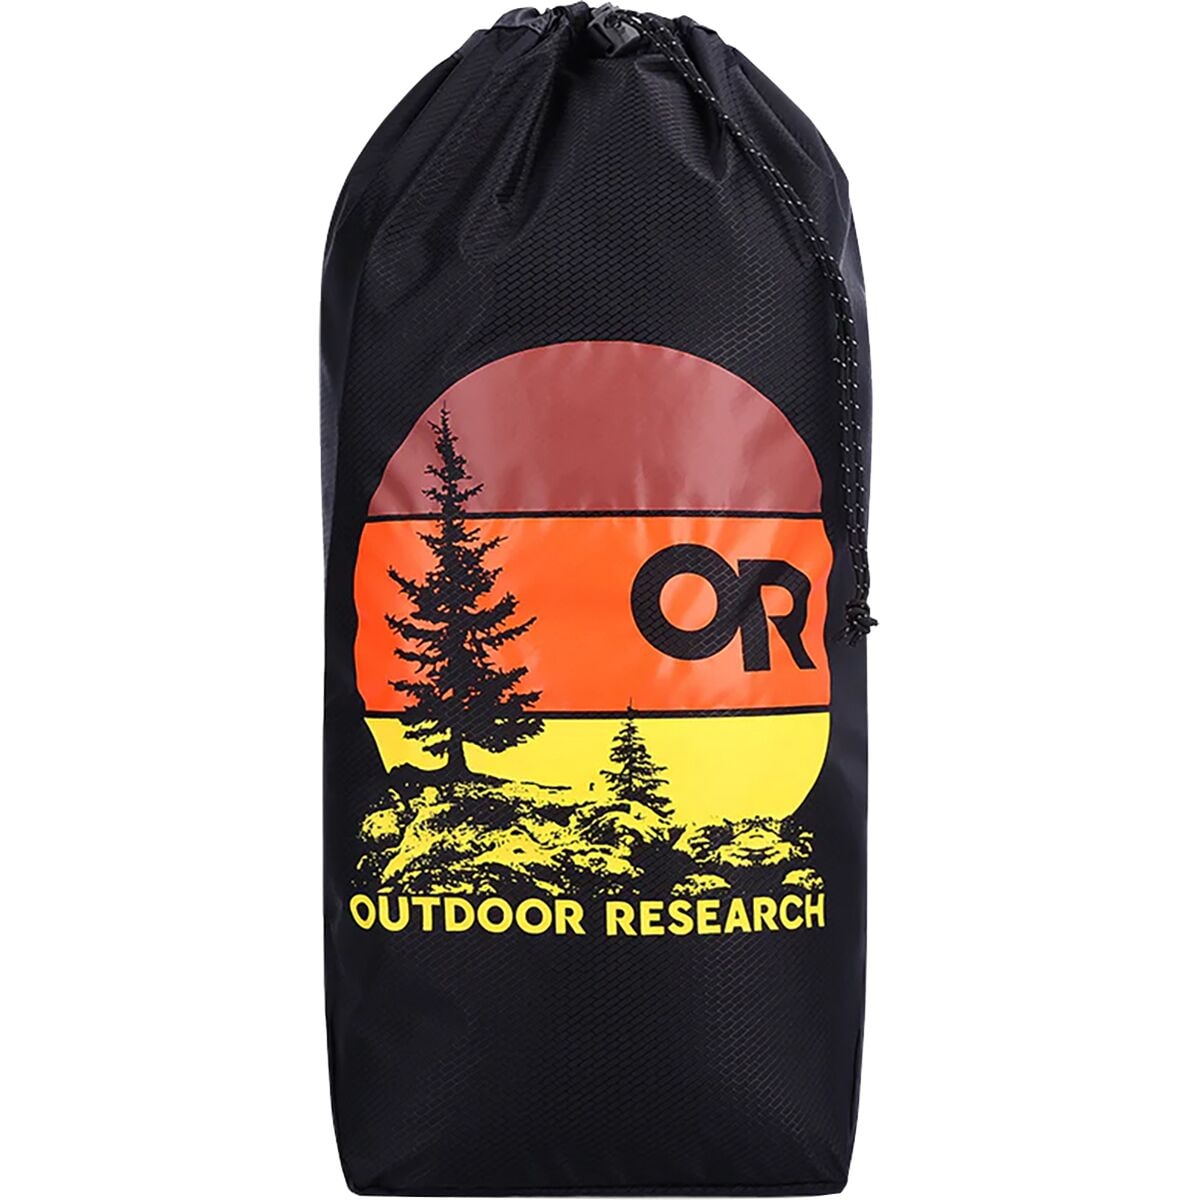 Outdoor Research PackOut Graphic 35L Stuff Sack